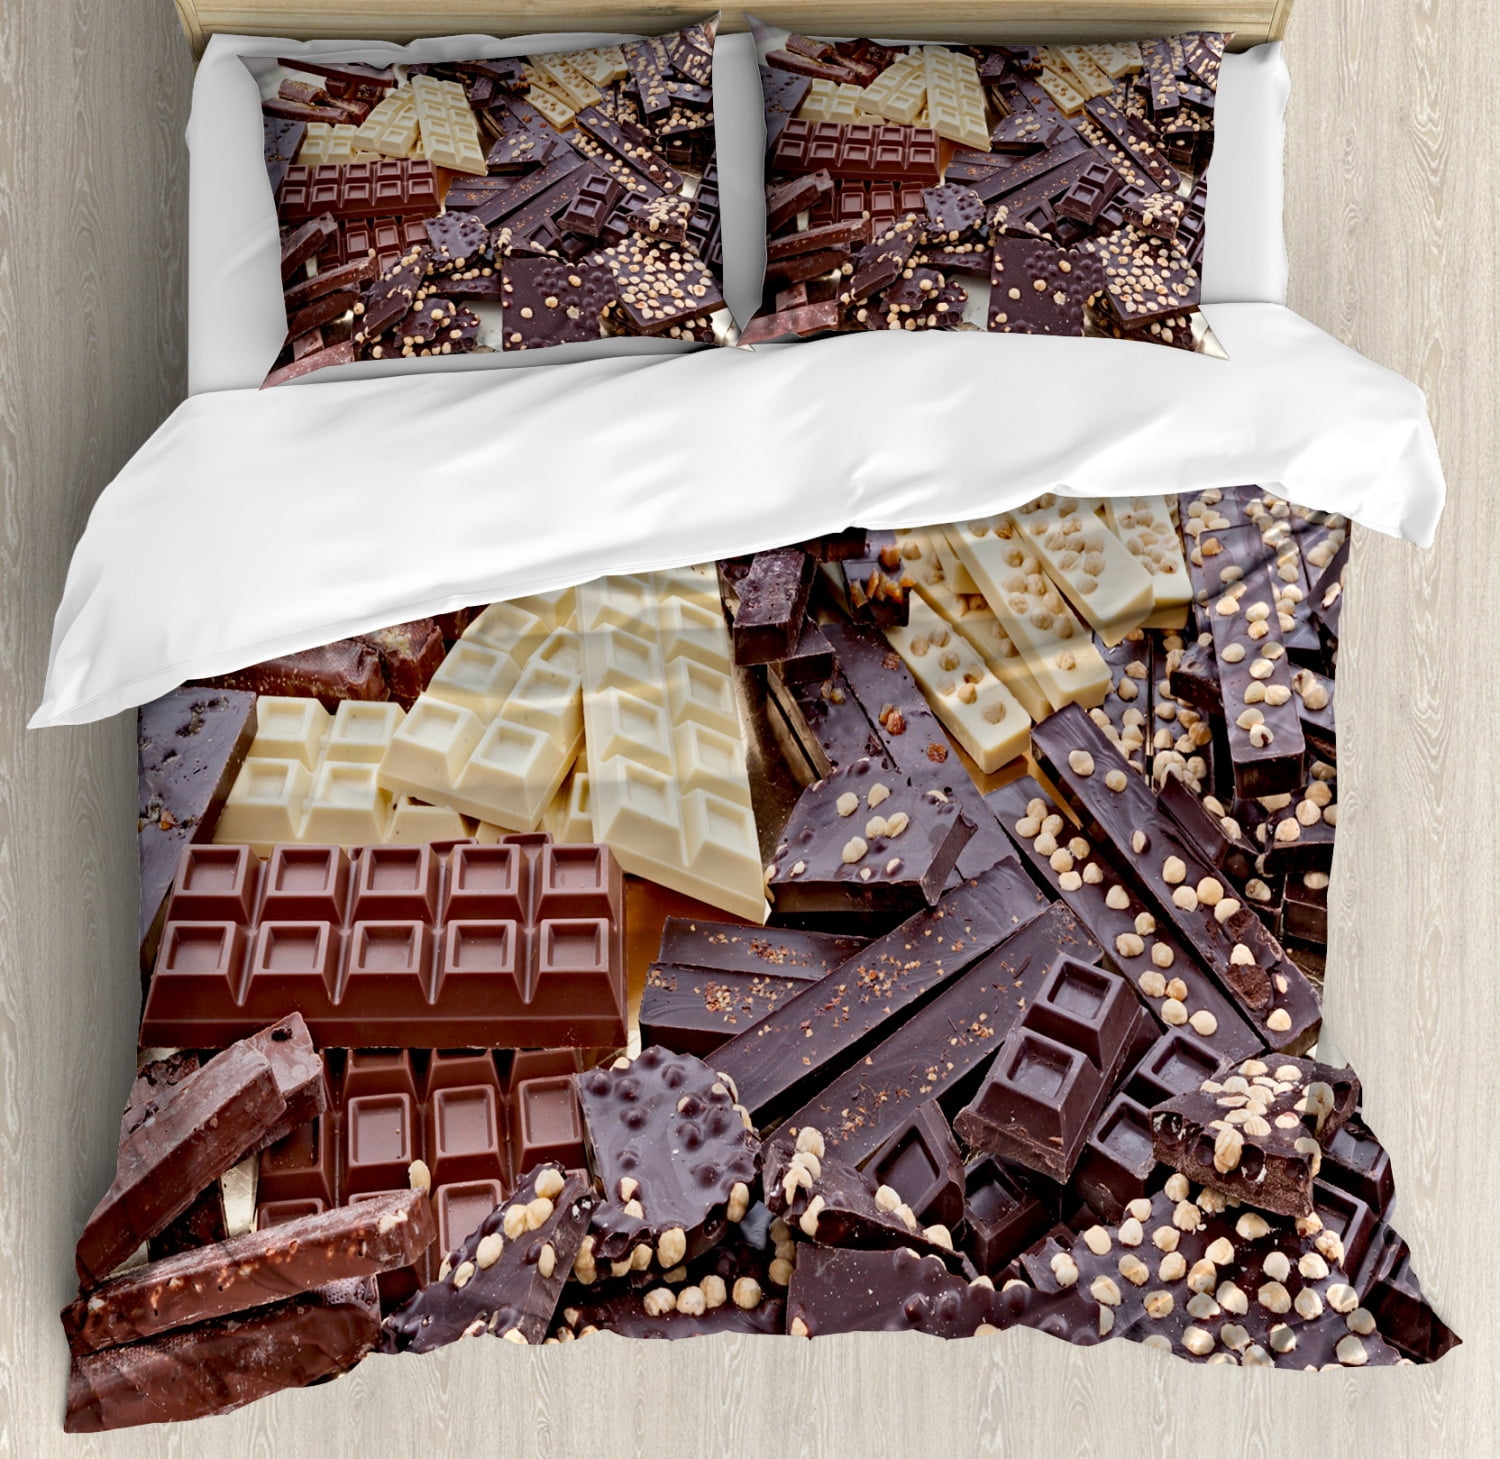 Chocolate Duvet Cover Set King Size, Chocolate Brown King Duvet Cover